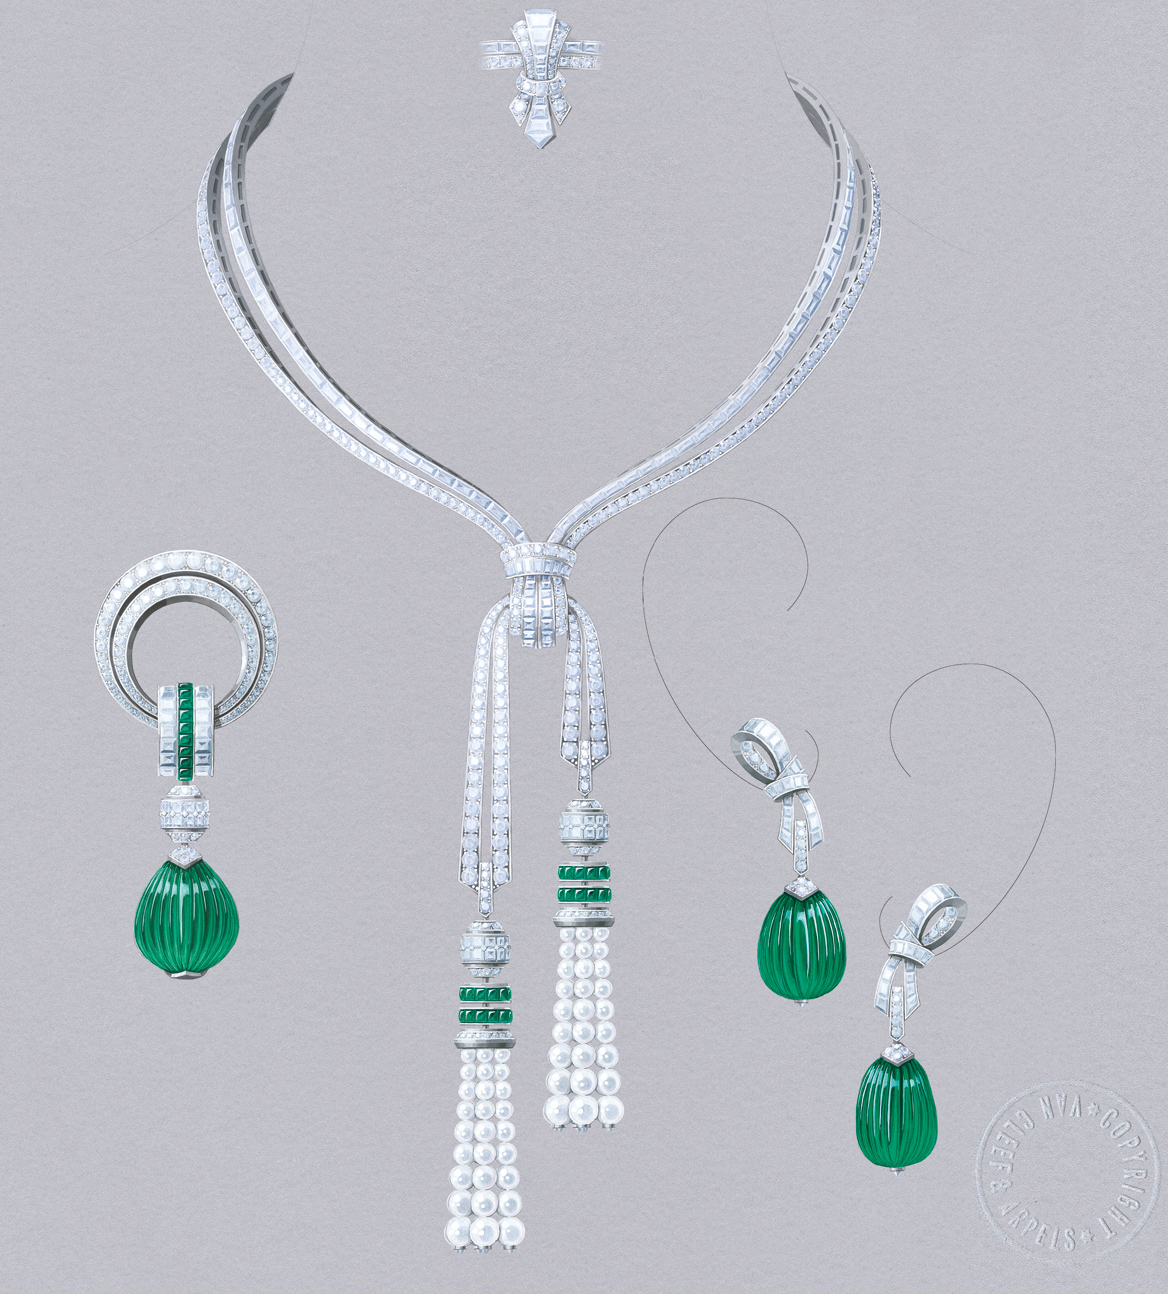 Van Cleef&Arpels Grand Opus set. White gold, round, baguette-cut and princess-cut diamonds, buff-topped square-cut emeralds, white cultured pearls, 3 carved emeralds for 127.88 carats (Colombia). Transformable necklace, earrings and clip with detachable pendants.